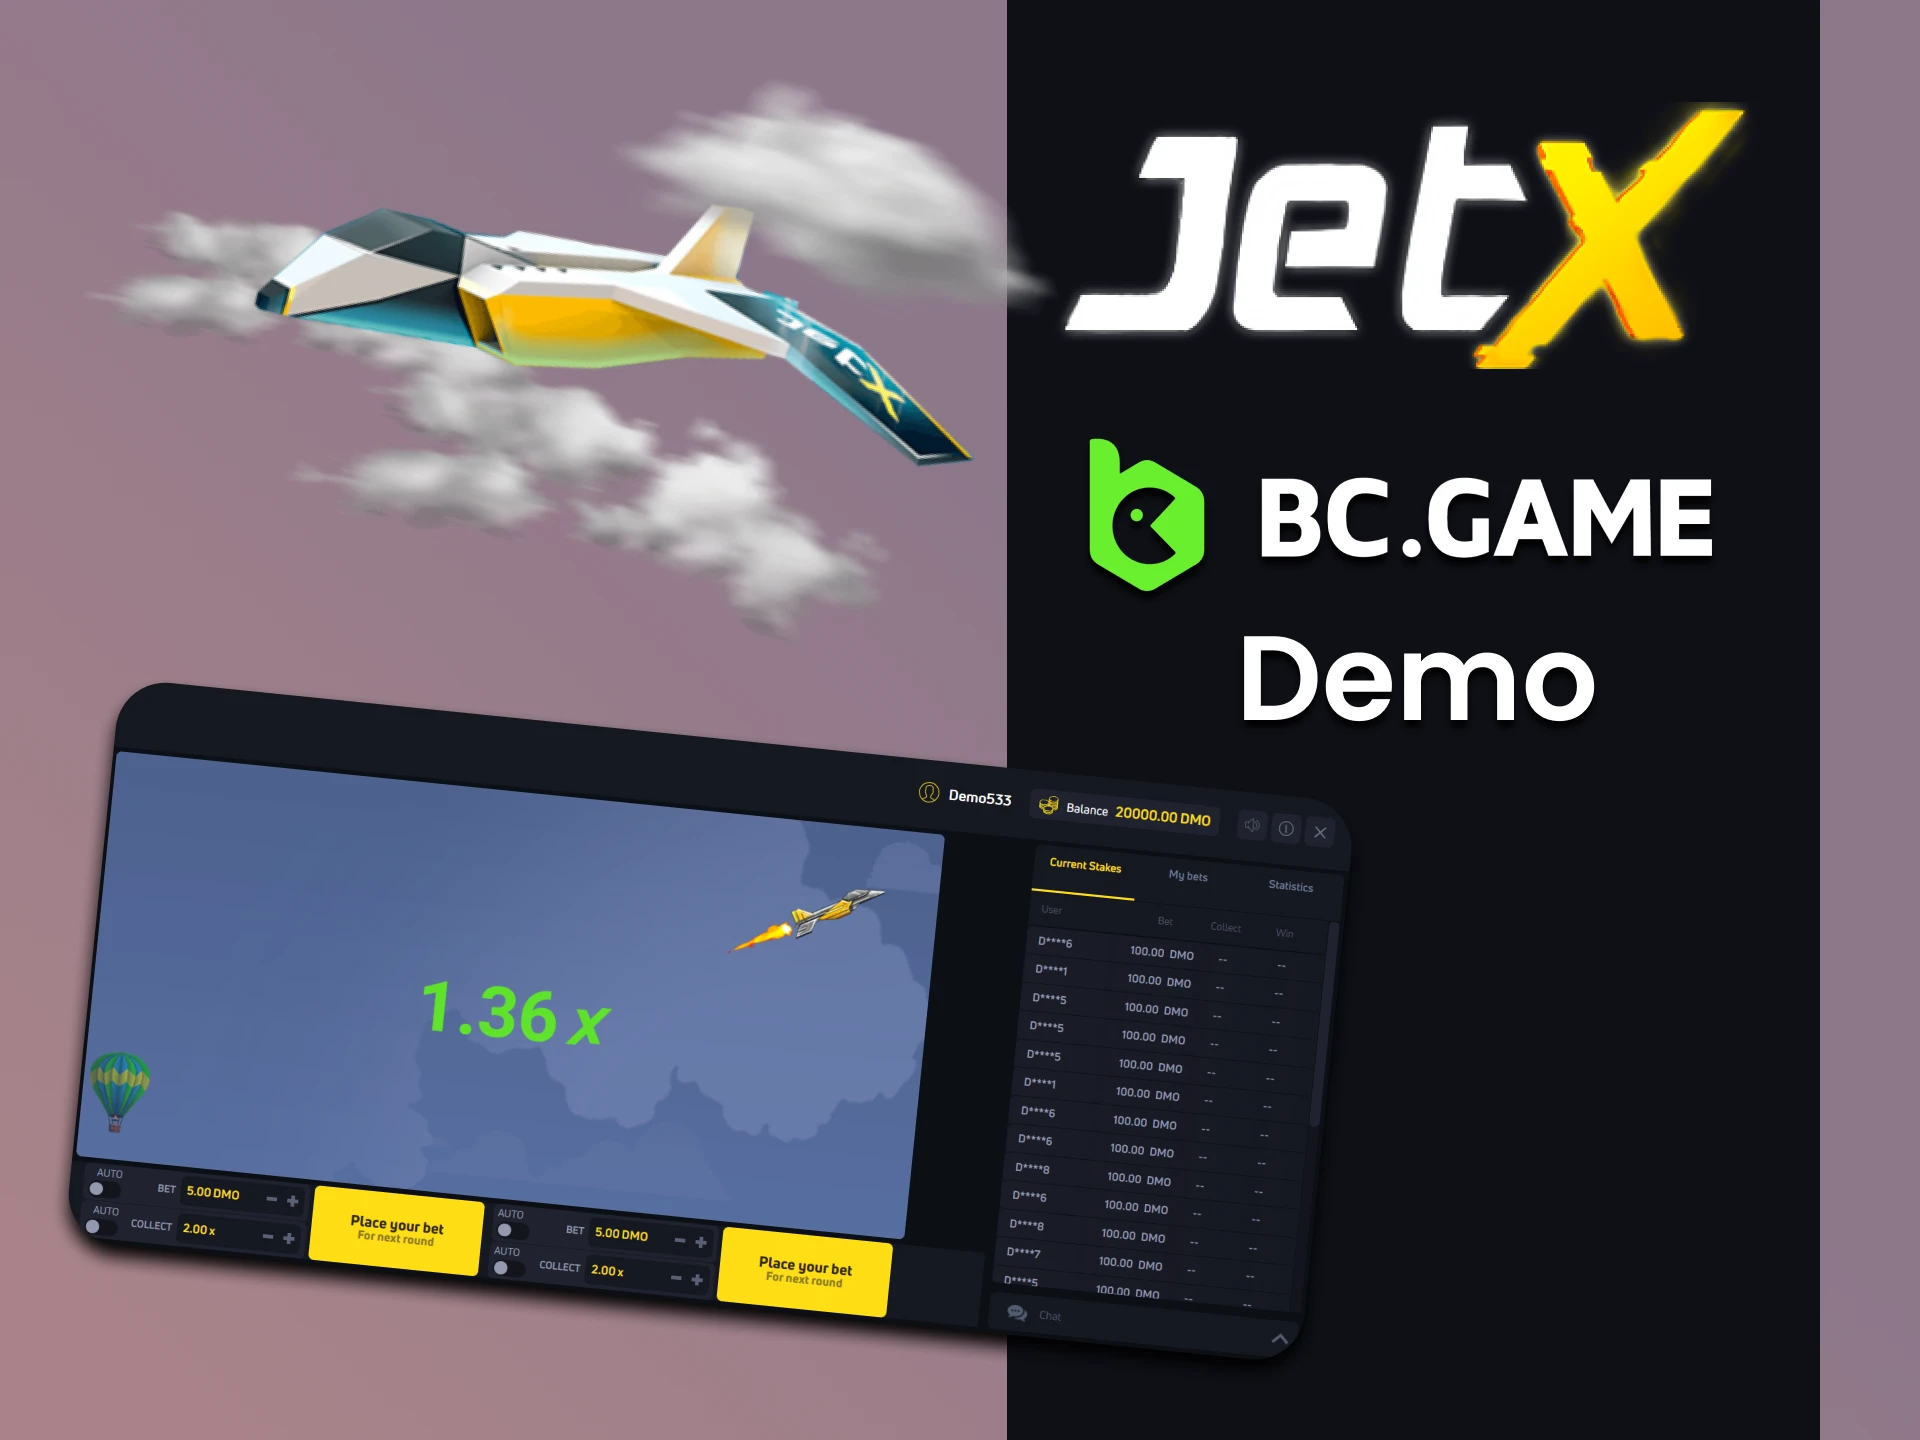 You can train in the demo version of JetX on BC Game.